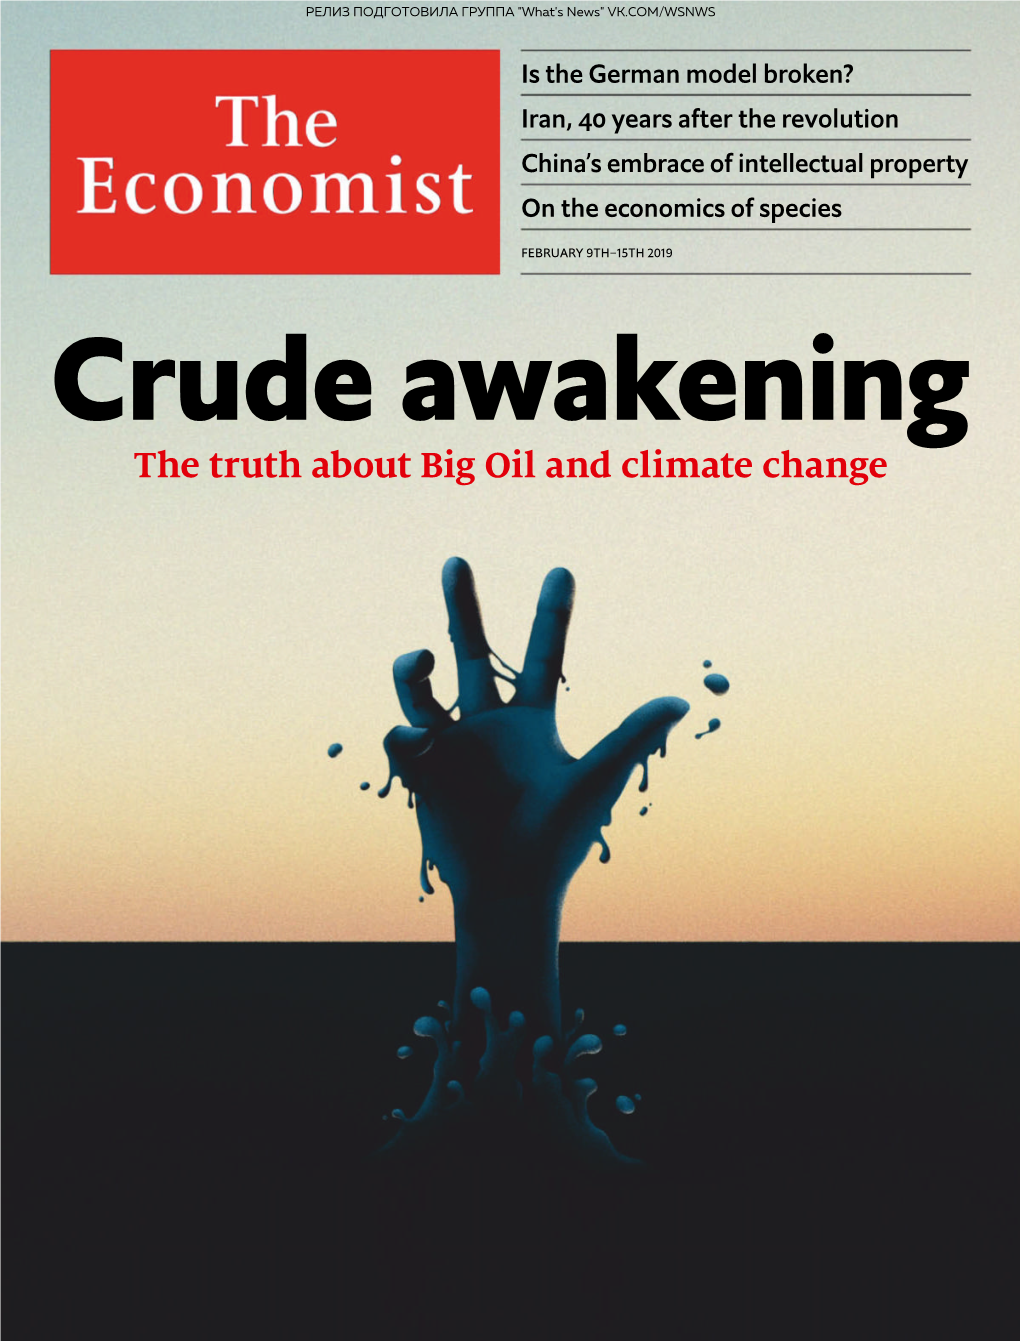 The Truth About Big Oil and Climate Change РЕЛИЗ ПОДГОТОВИЛА ГРУППА "What's News" VK.COM/WSNWS